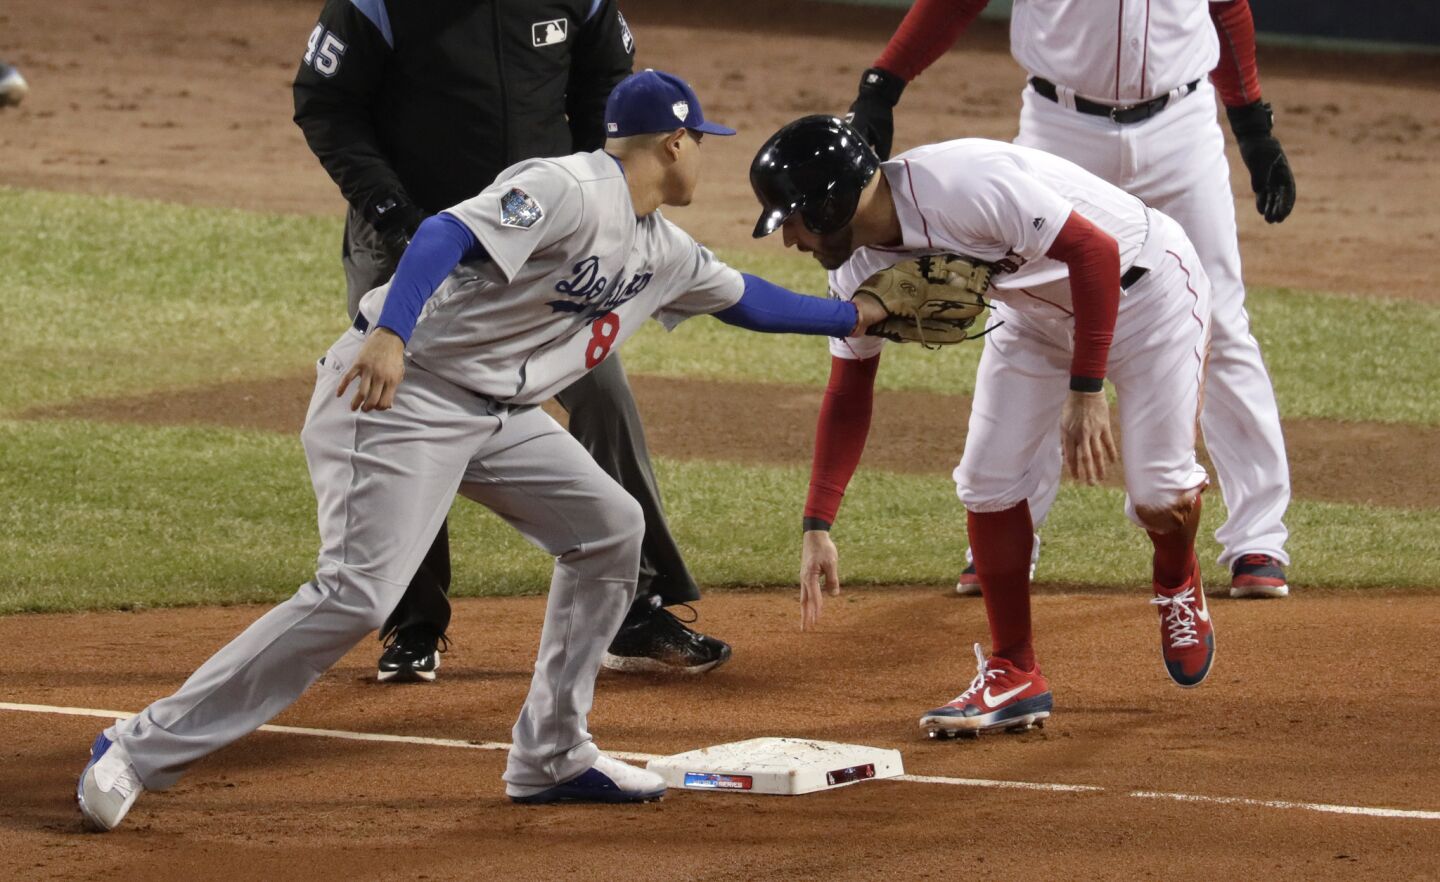 Dodgers' Manny Machado tags out Red Sox Ian Kinsler at third base in the second inning.